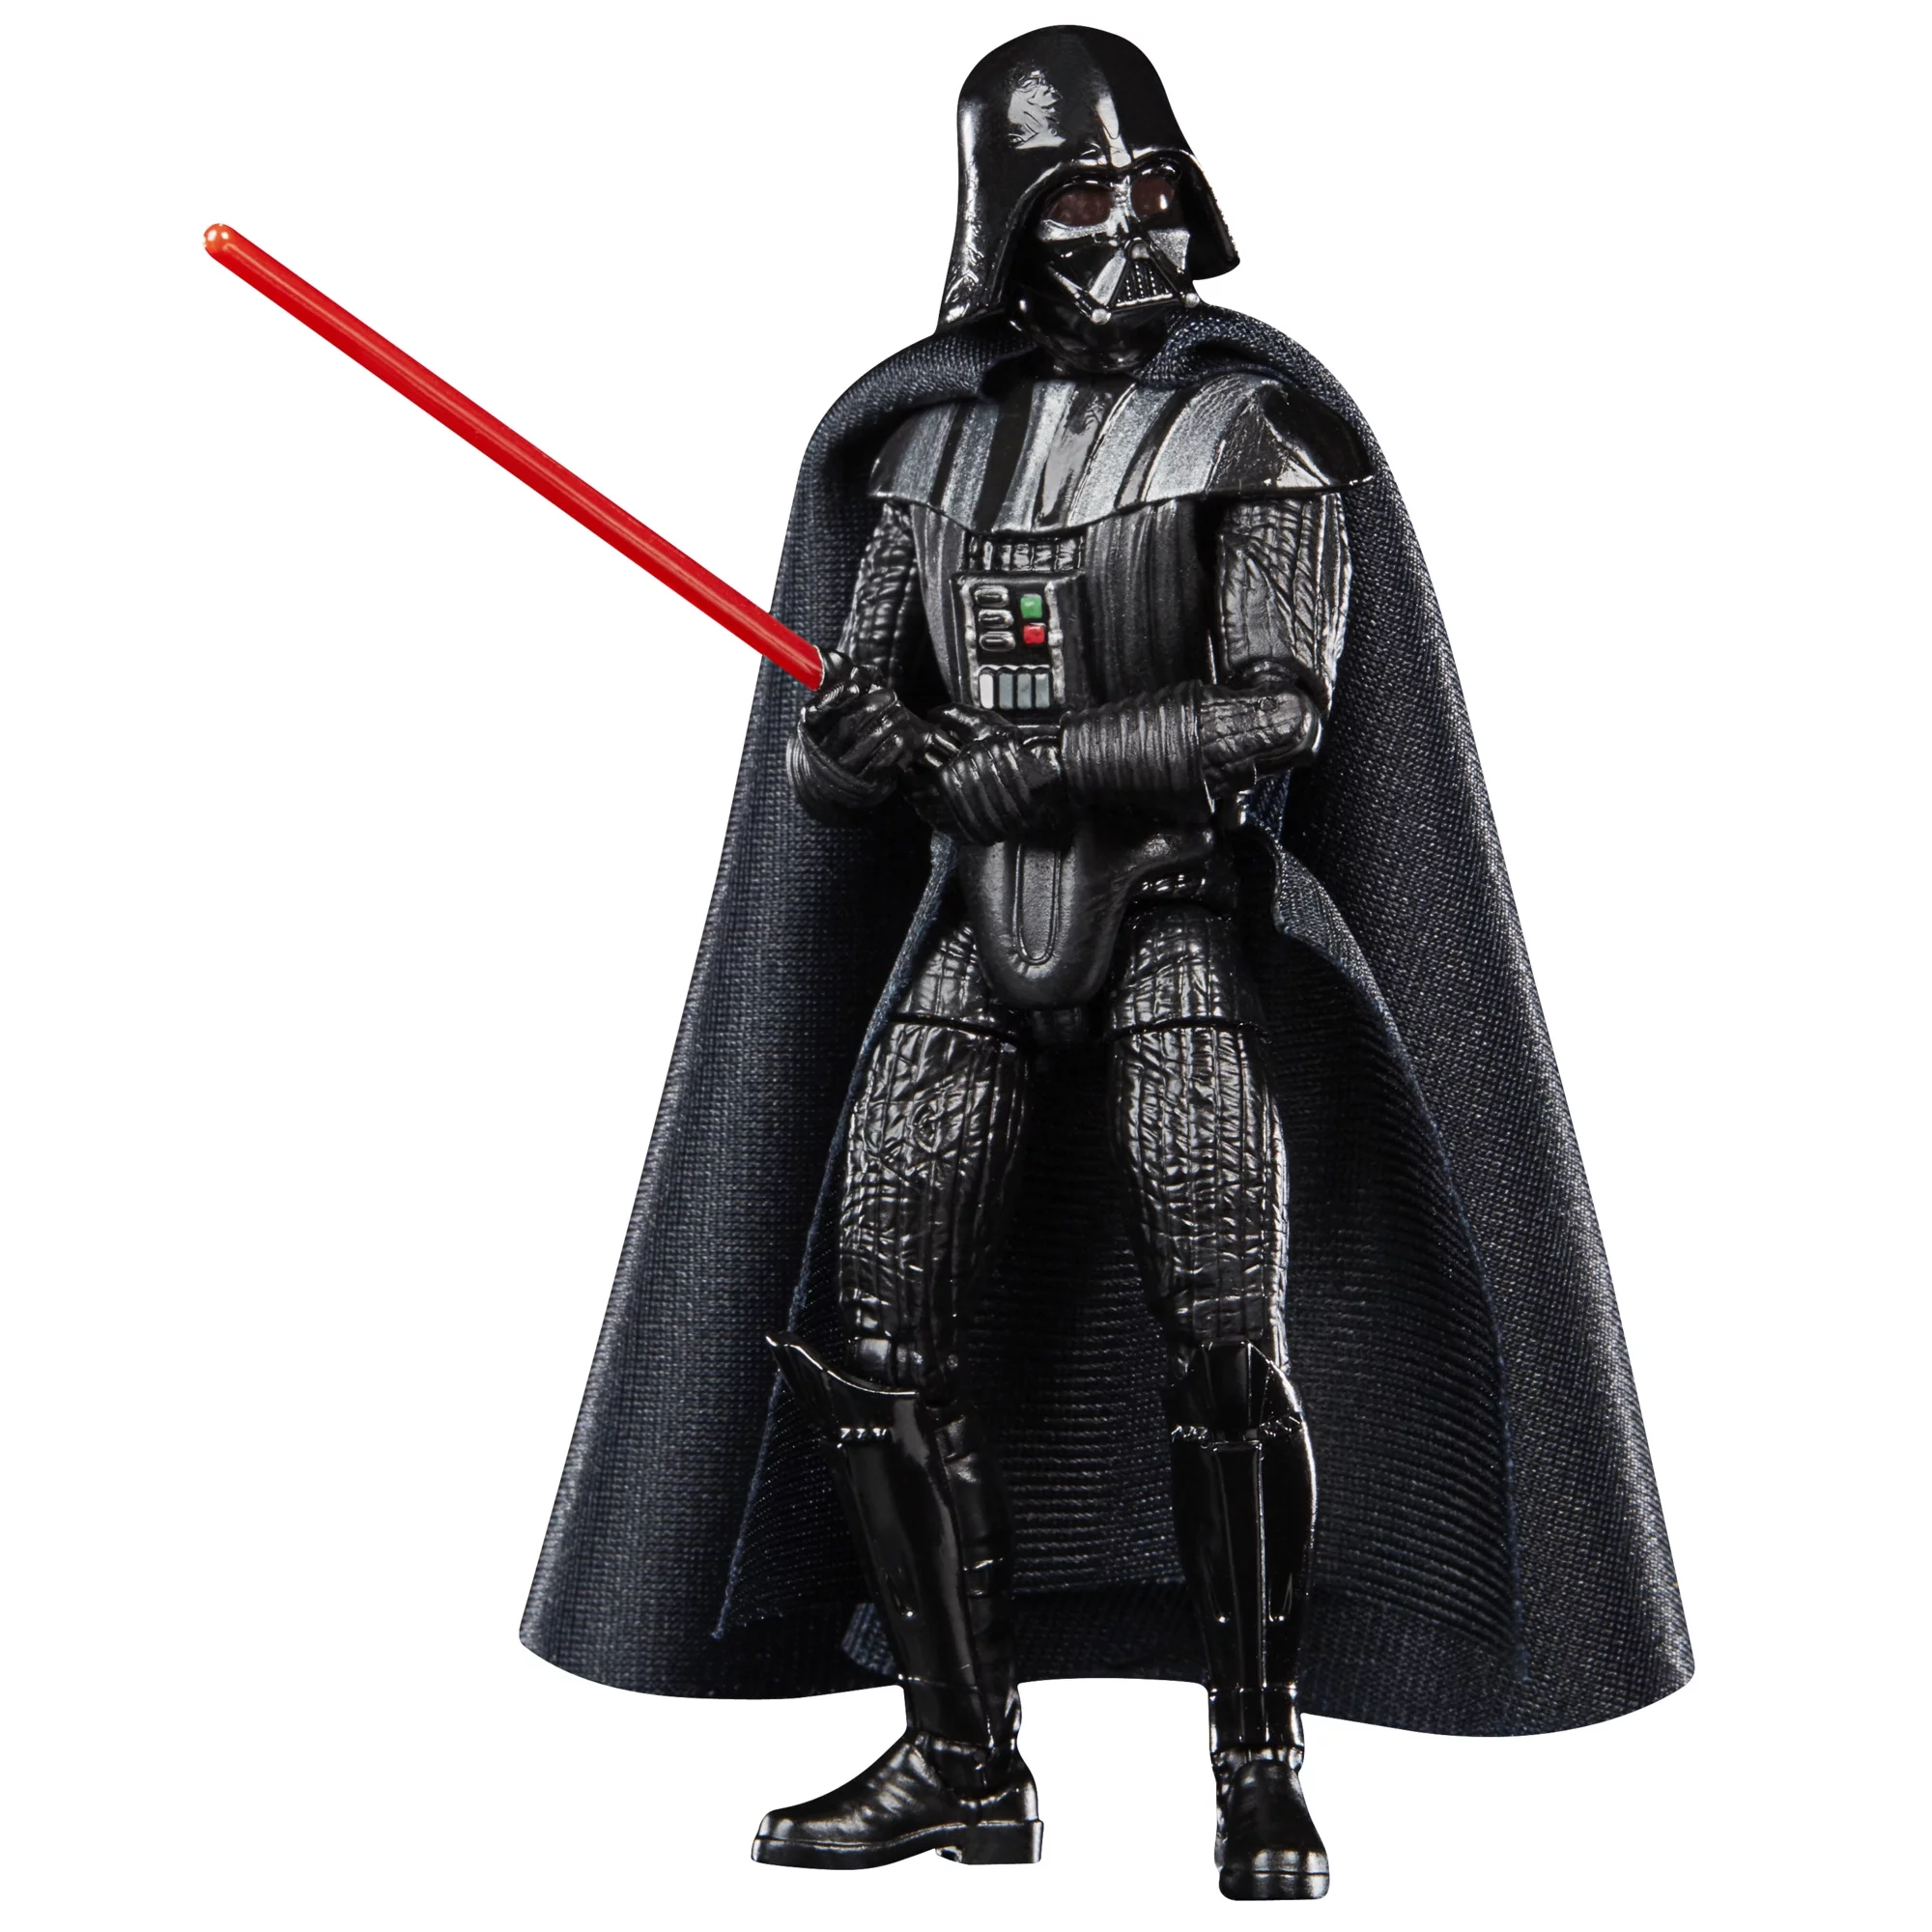 Star Wars: Obi-Wan Kenobi - The Vintage Collection Darth Vader (The Dark Times) Toy Action Figure for Boys and Girls Ages 4 5 6 7 8 and Up (9”)